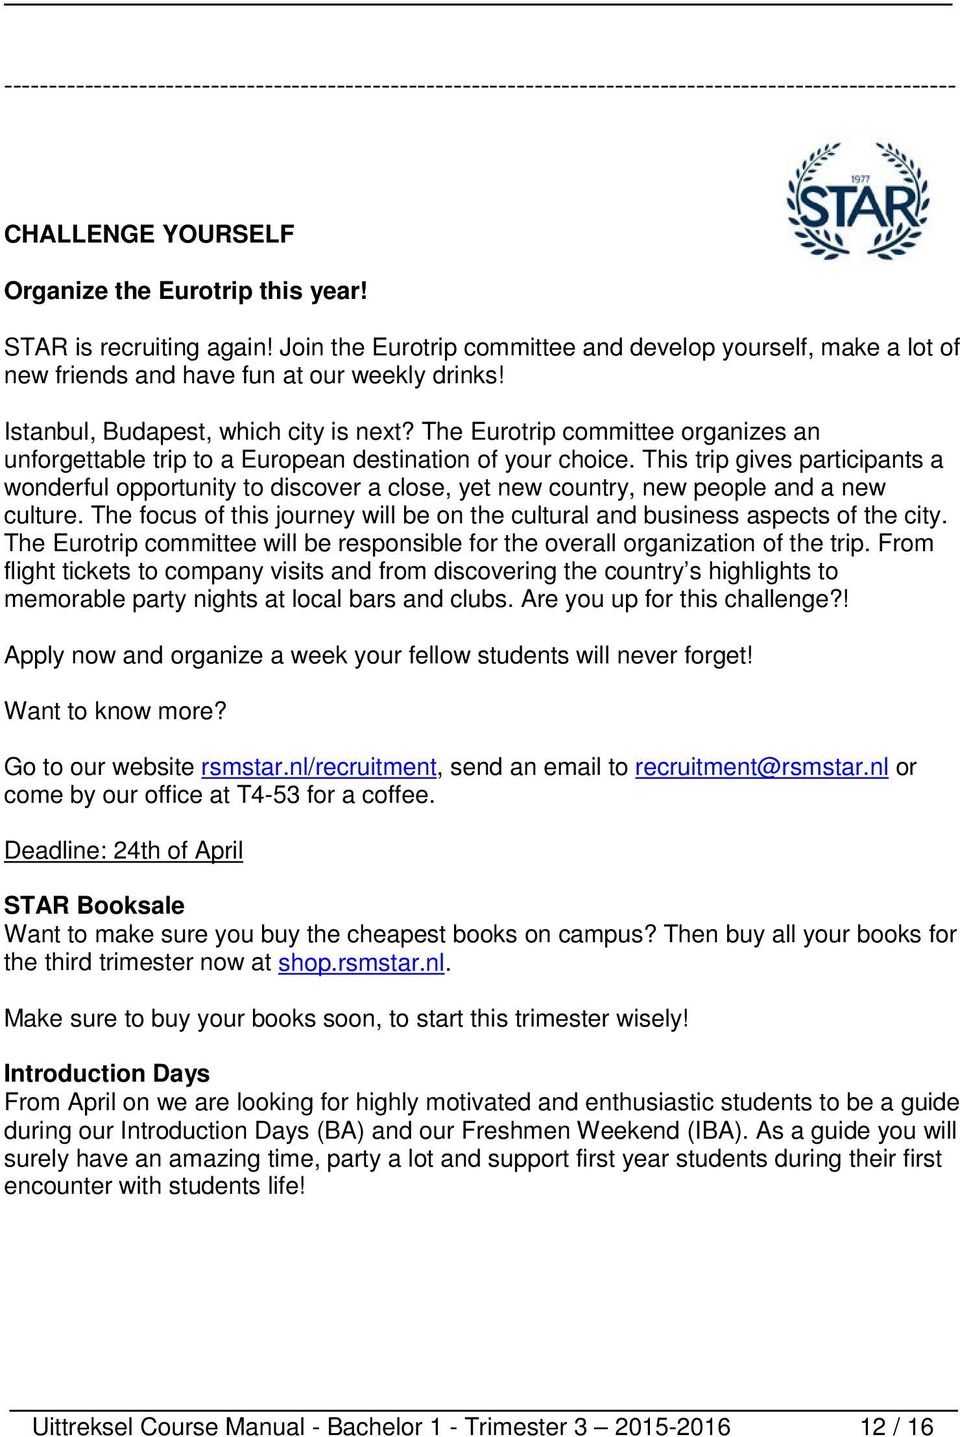 The Eurotrip committee organizes an unforgettable trip to a European destination of your choice.